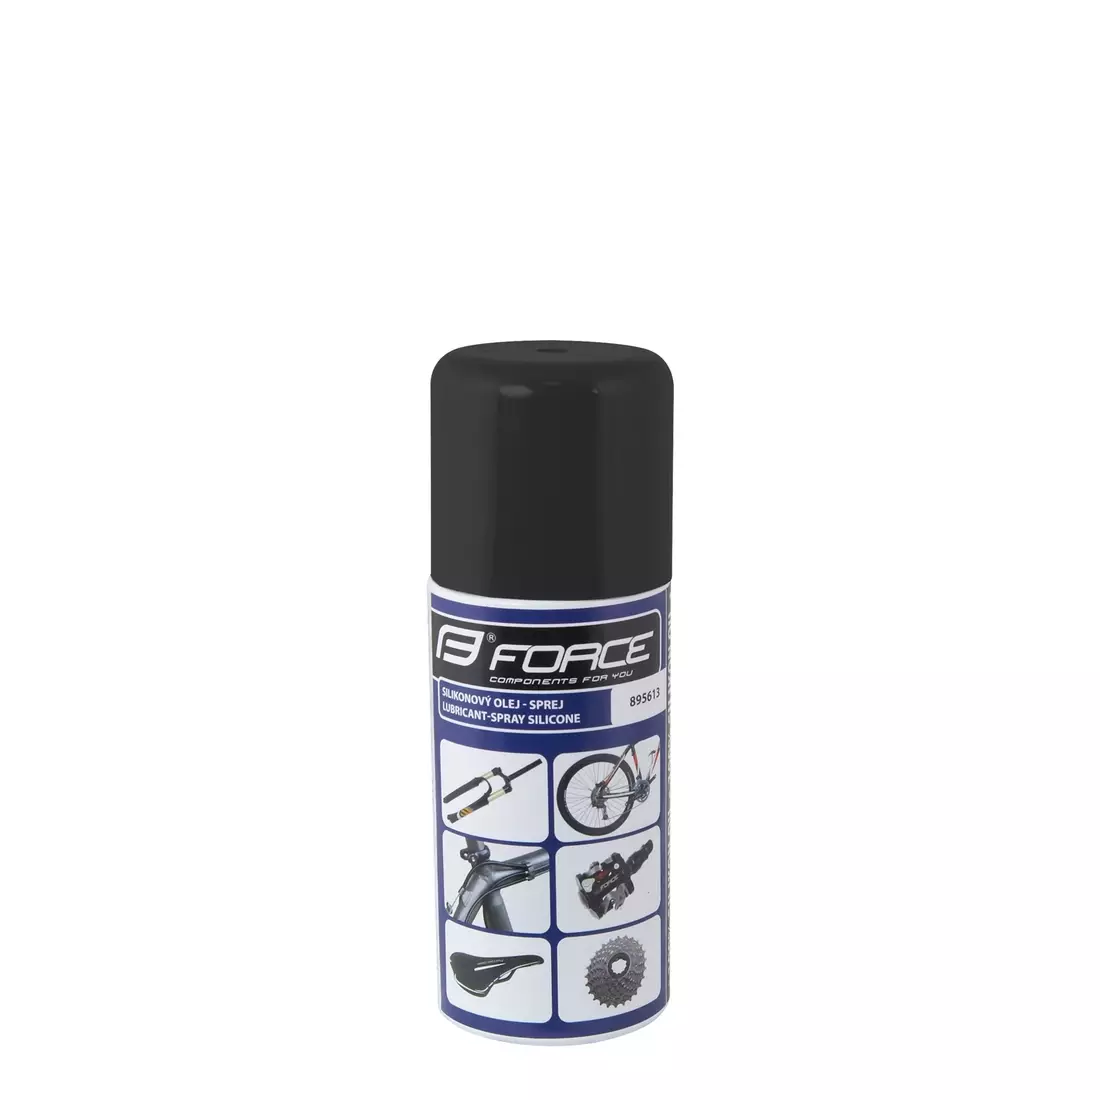 FORCE SILICONE lubricating oil spray 150ml 895613